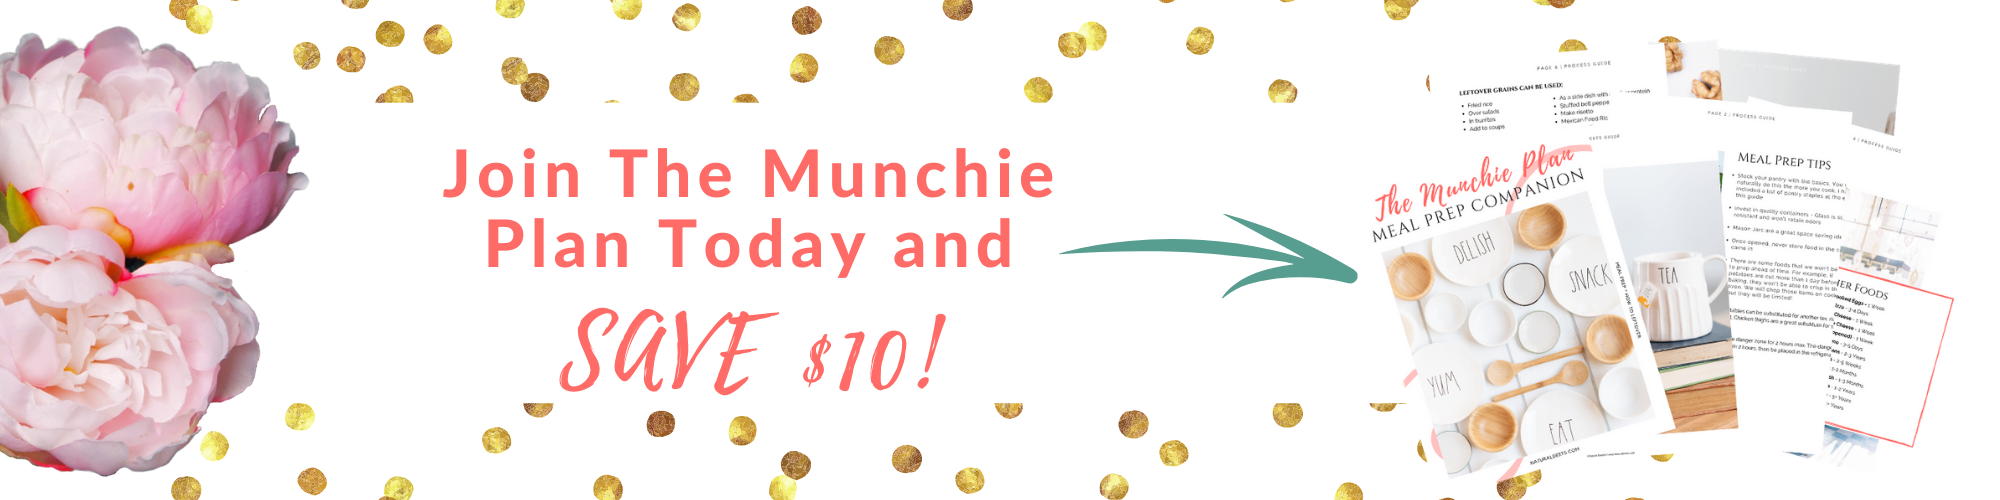 a picture that says join the munchie plan today and save $10